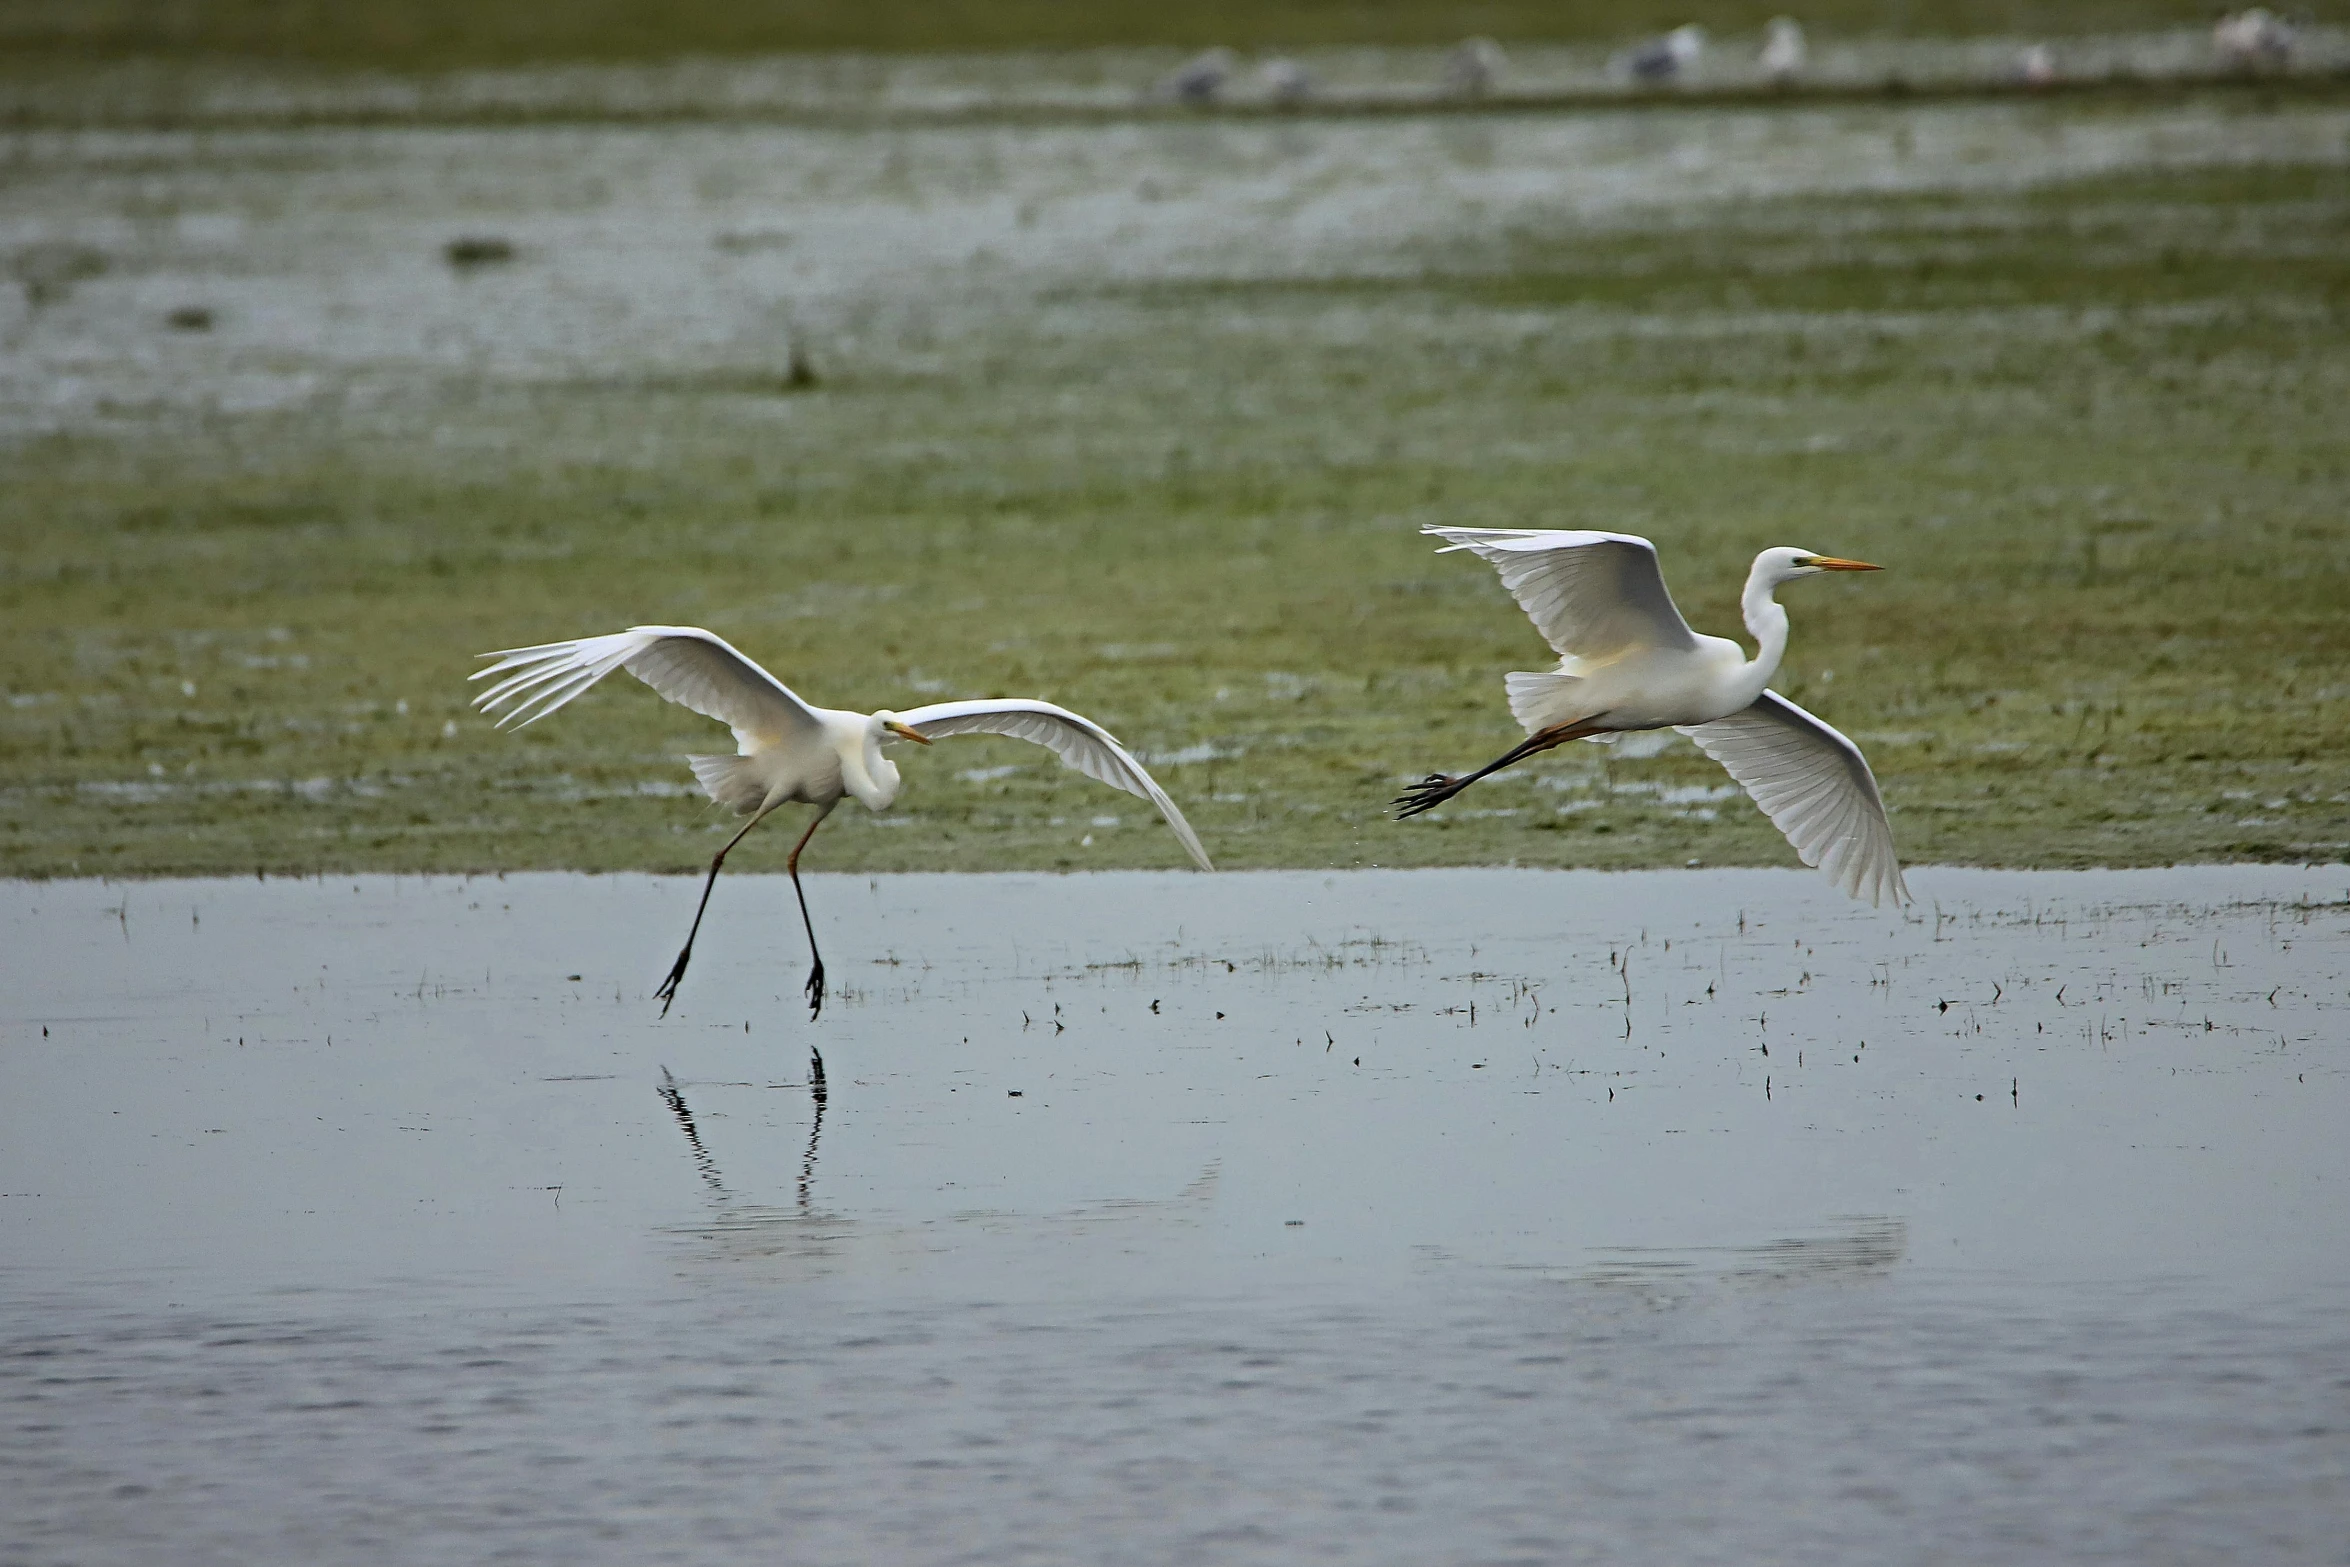 two white birds flying over a body of water, marsh, at takeoff, albino, medium distance shot